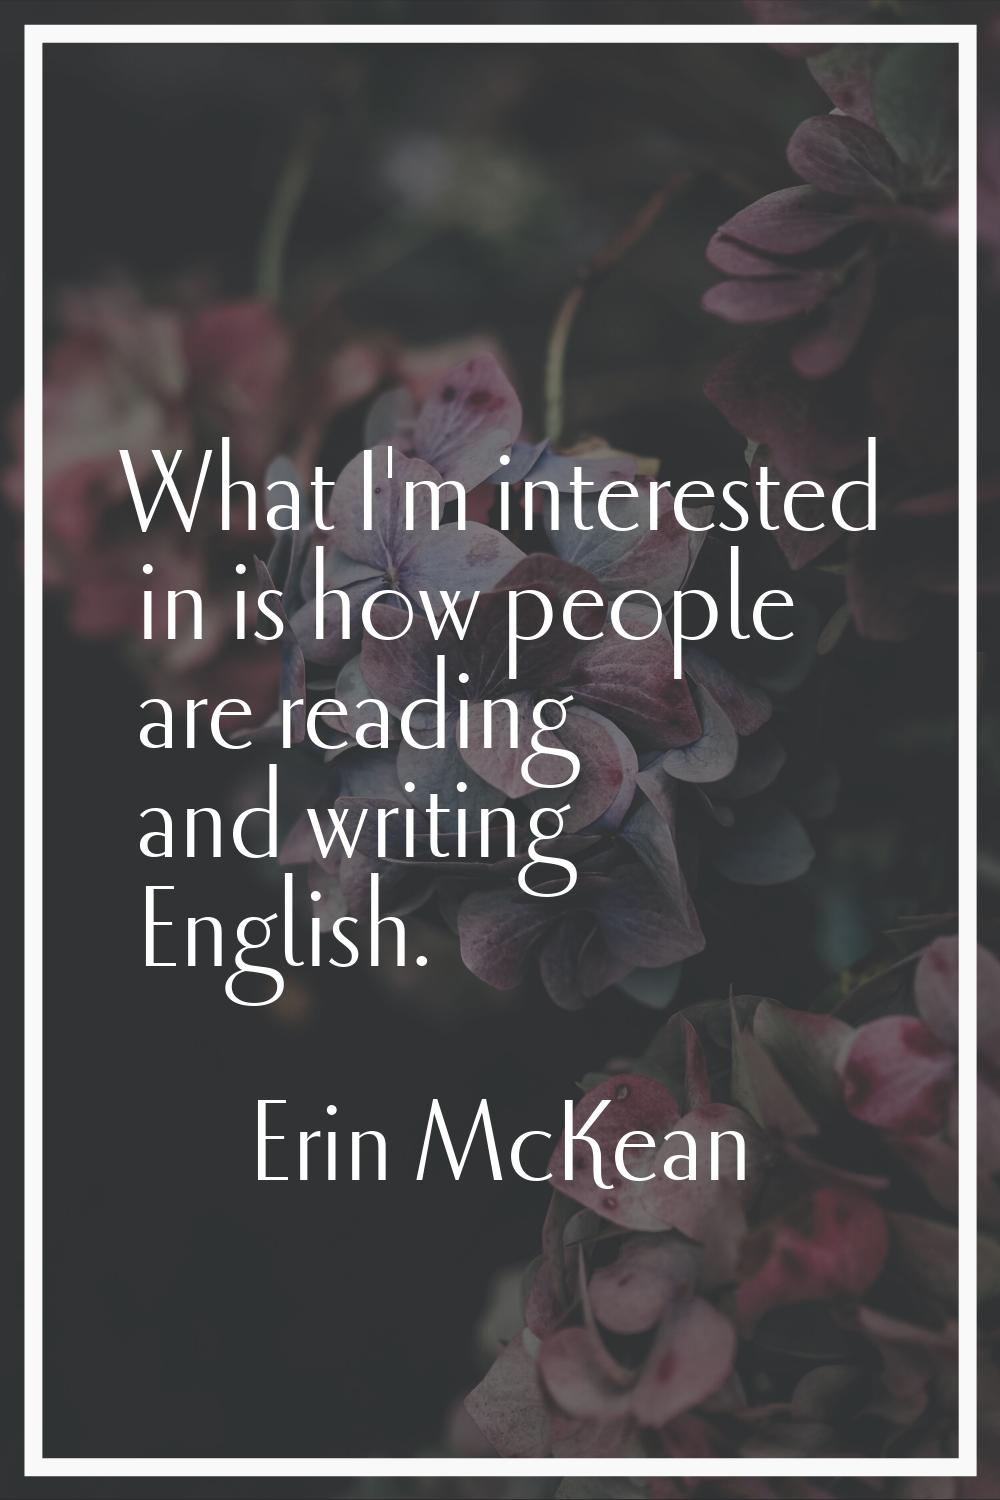 What I'm interested in is how people are reading and writing English.